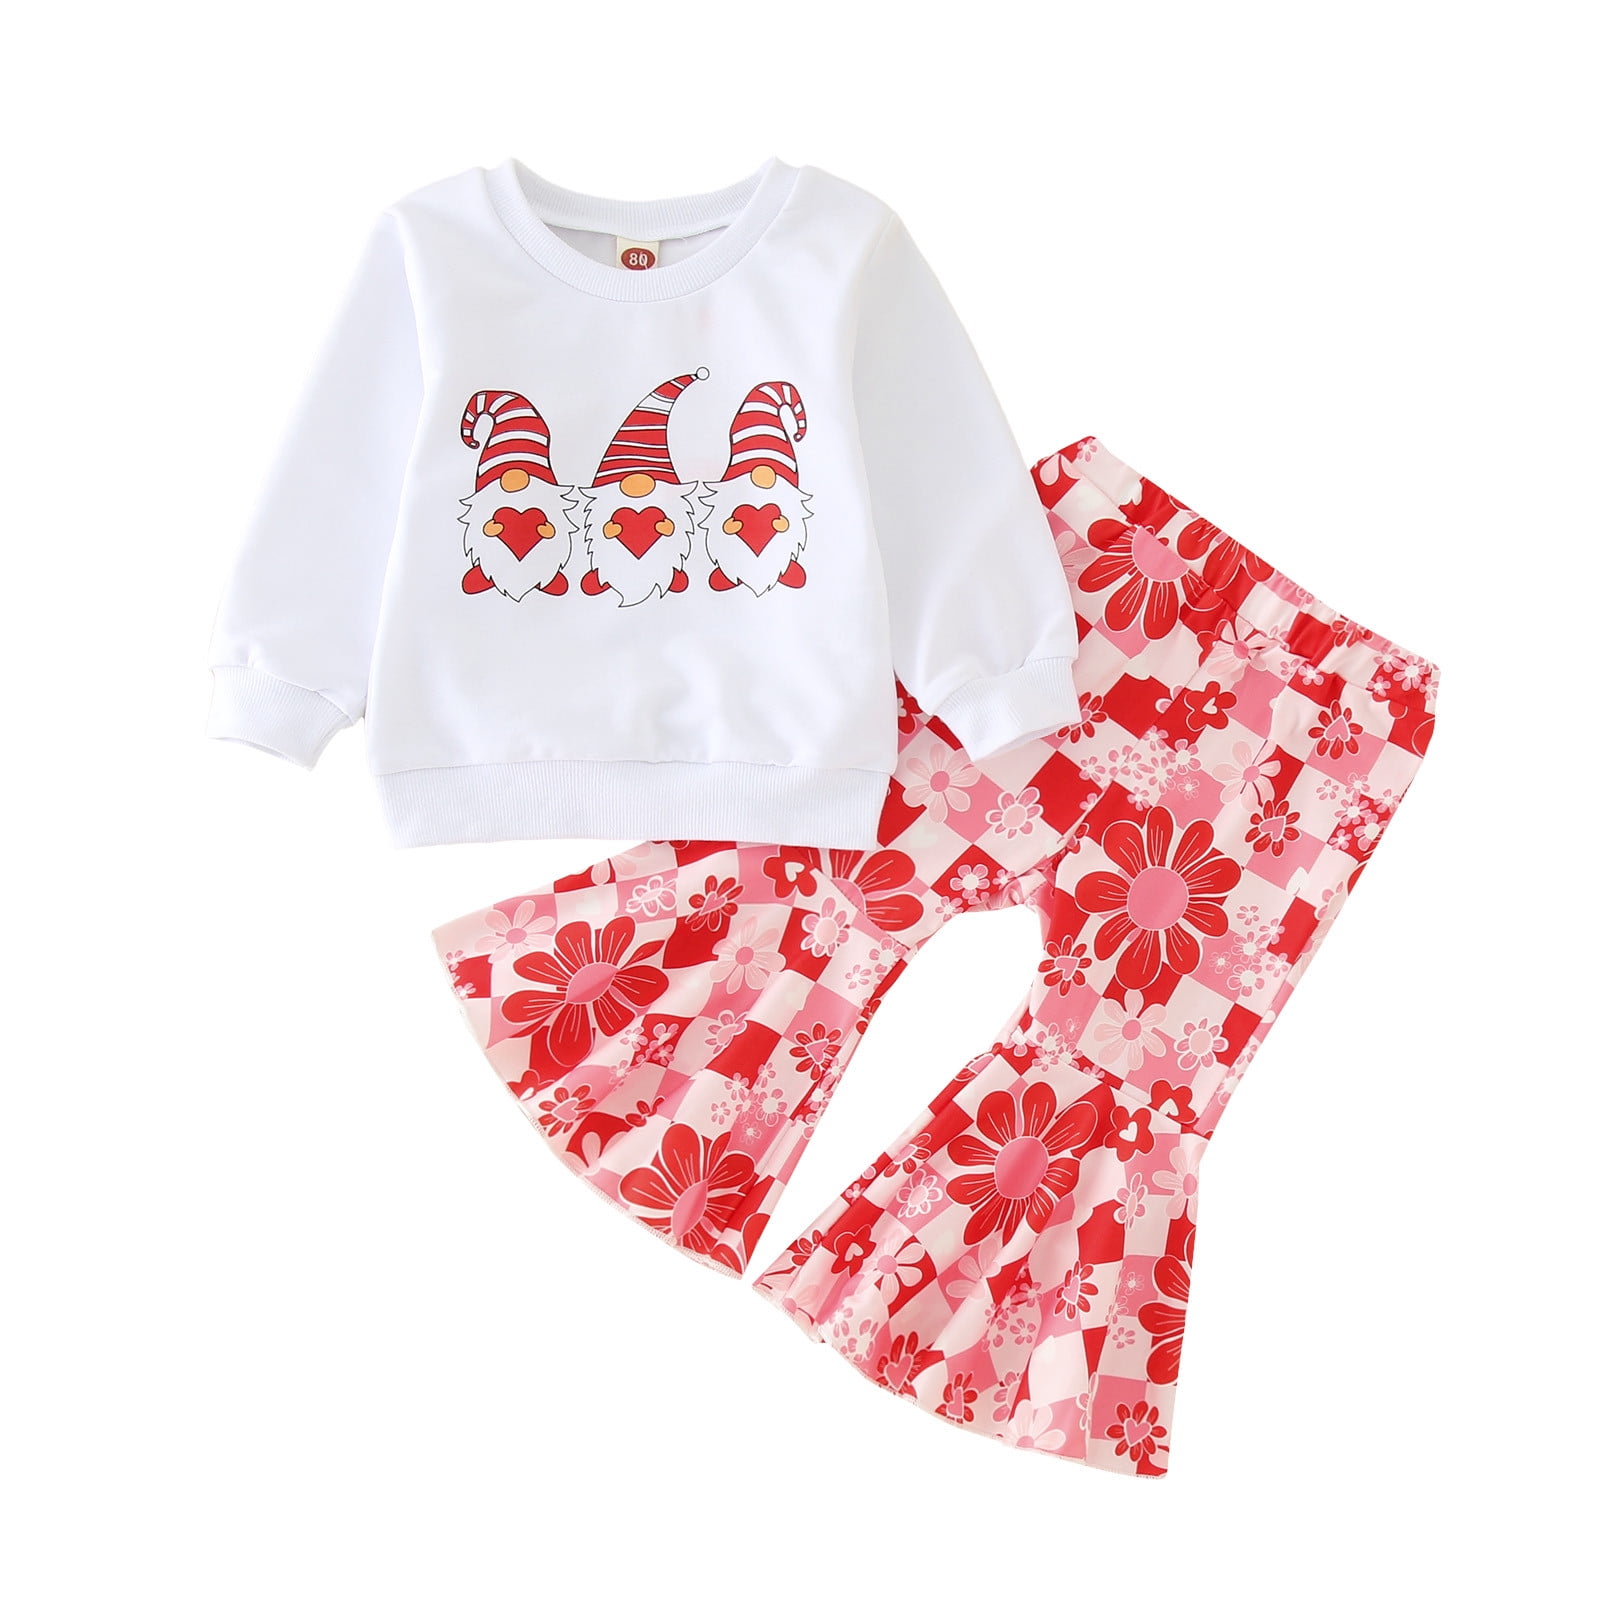 Uuszgmr Kids Outfits For Boys Girls Toddler Valentine'S Day Baby Girls ...